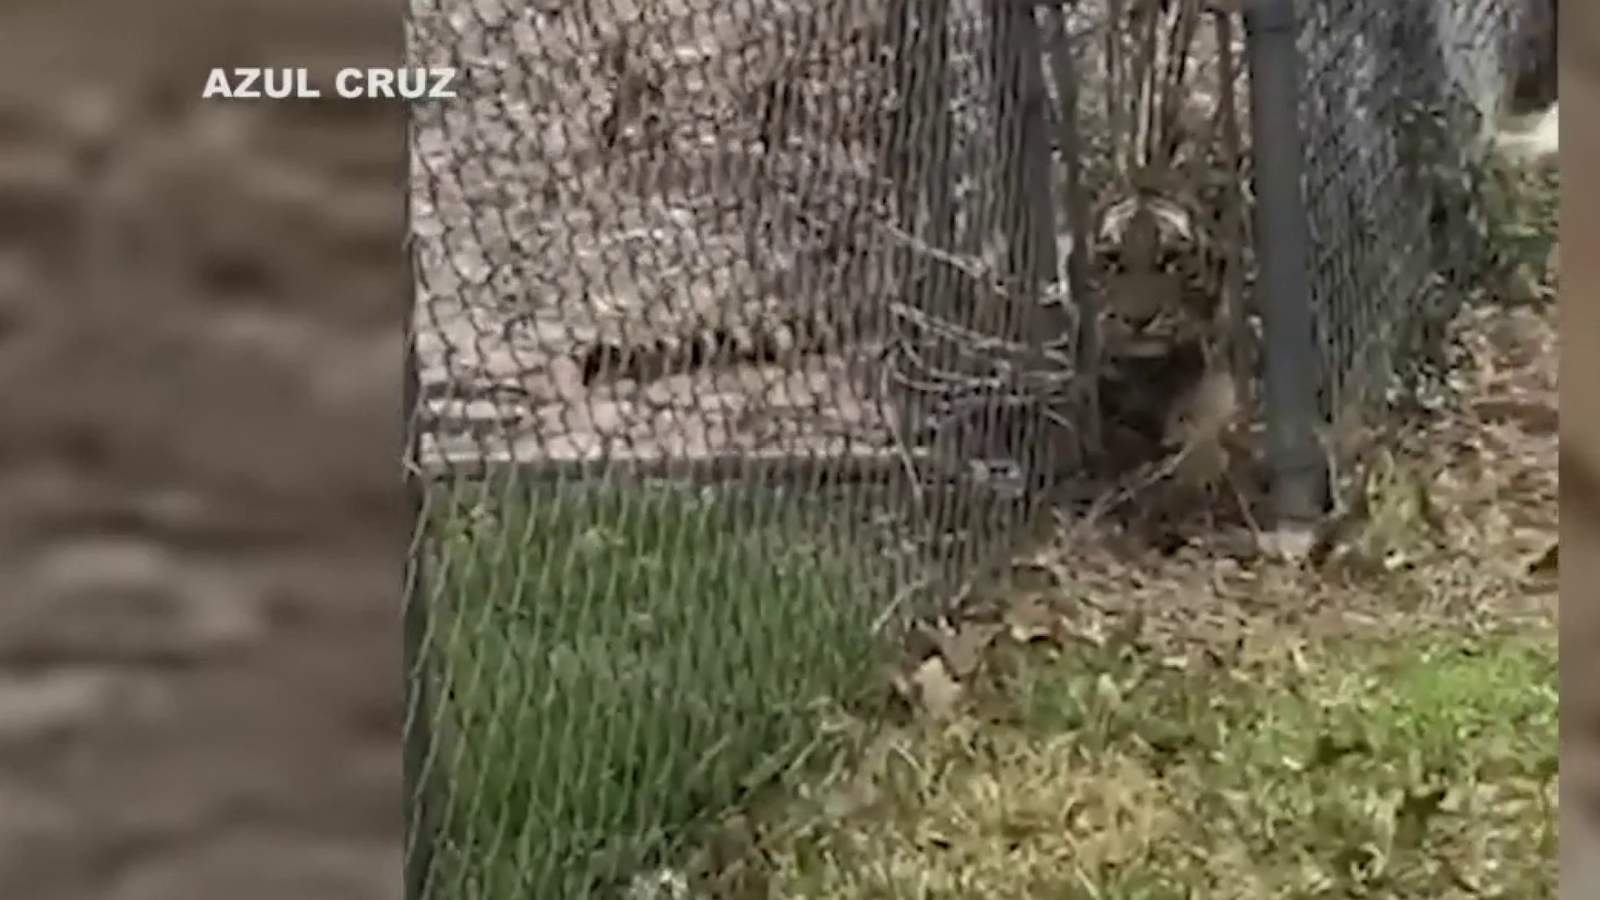 ACS warns against having tigers in the city after one was found in someone’s backyard